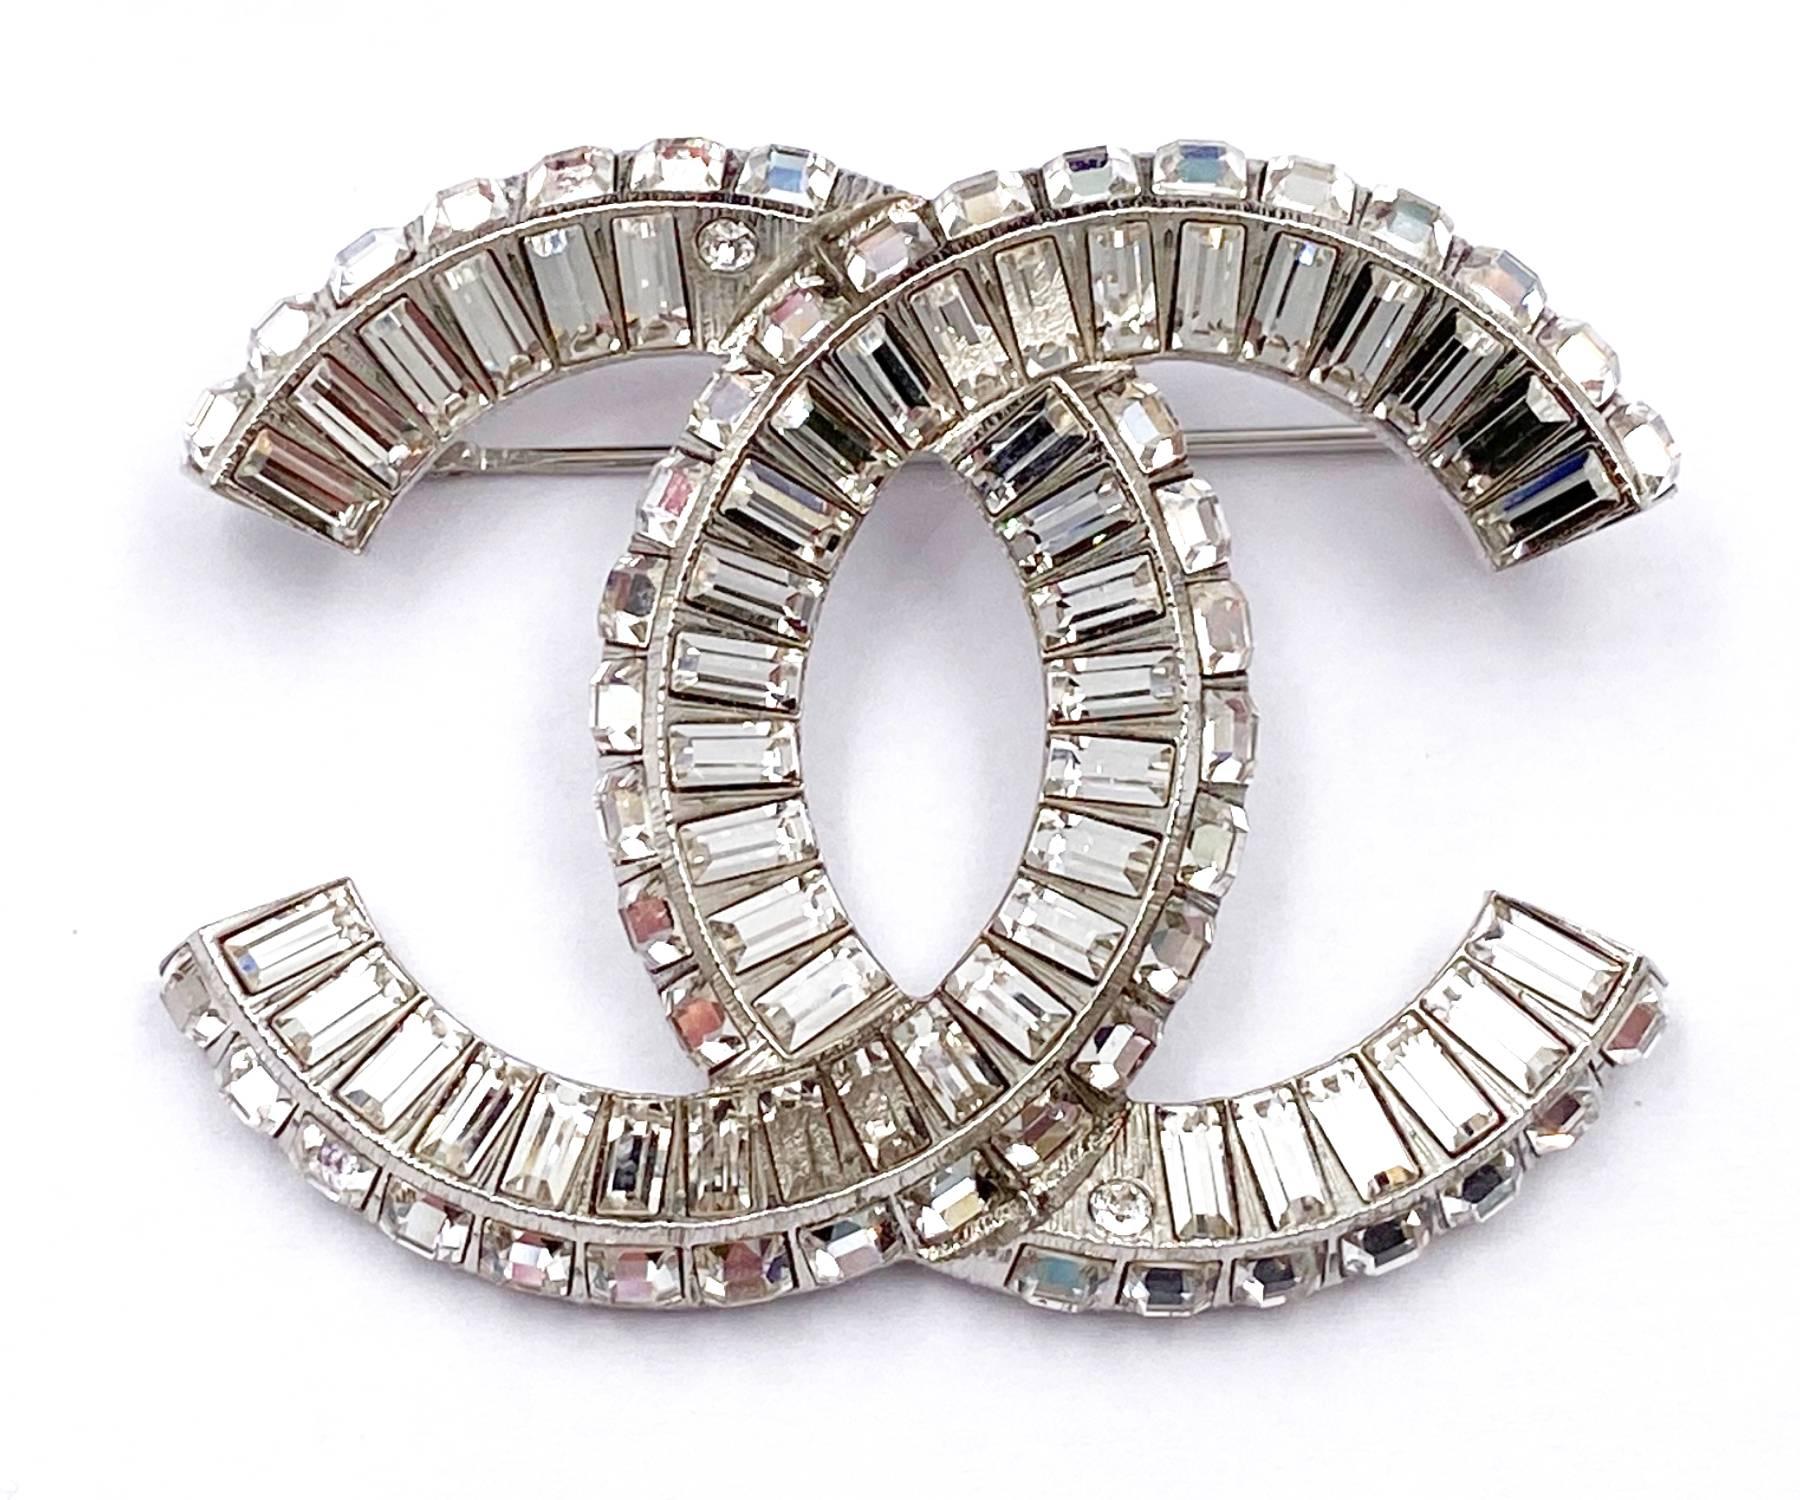 Chanel Brand New Classic Silver CC Baguette Crystal Brooch

*Marked 22
*Made in France
*Comes with the original box, pouch, booklet, camellia flower and ribbon
*Brand New

-Approximately 1.5″ x 2″
-Very pretty and classic

19269-6262